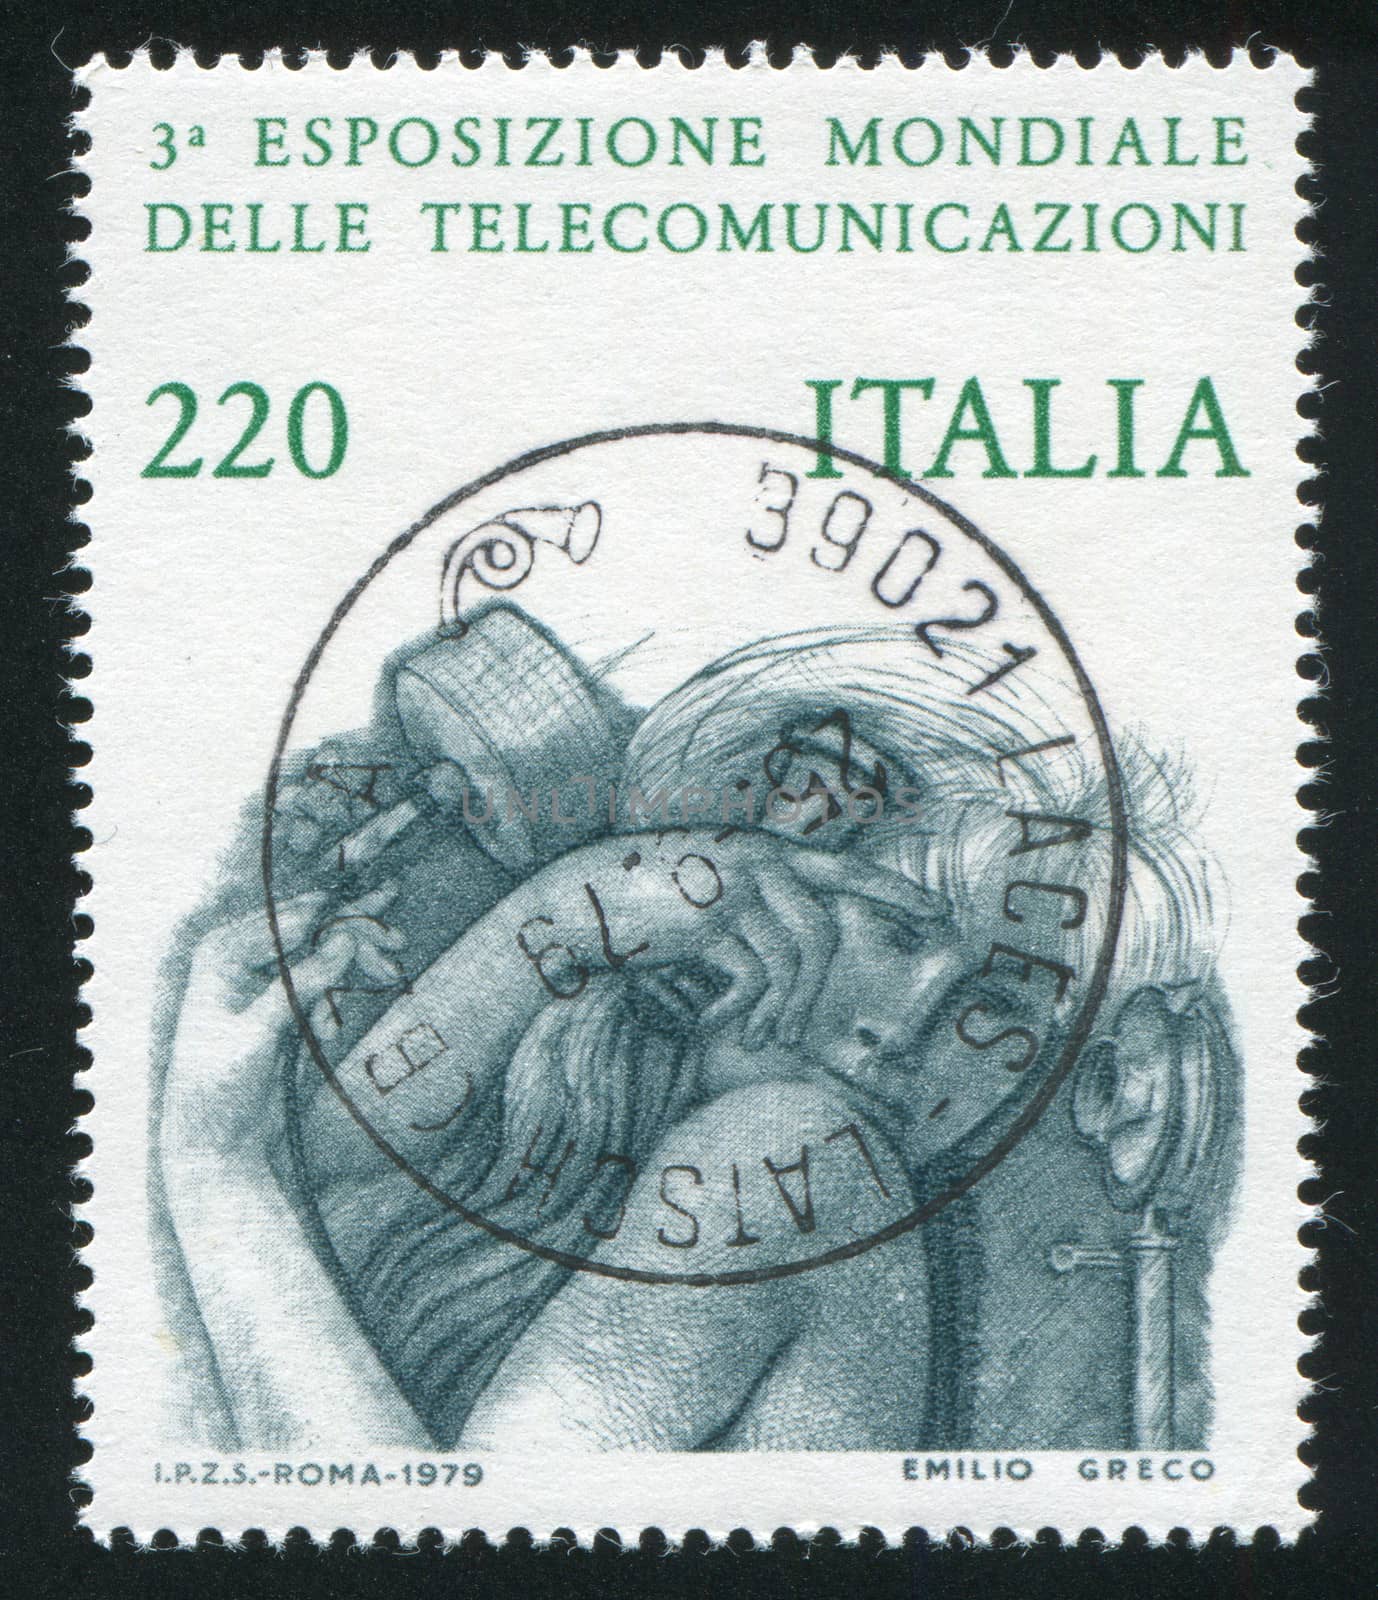 ITALY - CIRCA 1979: stamp printed by Italy, shows Woman with old-fashioned phone, circa 1979